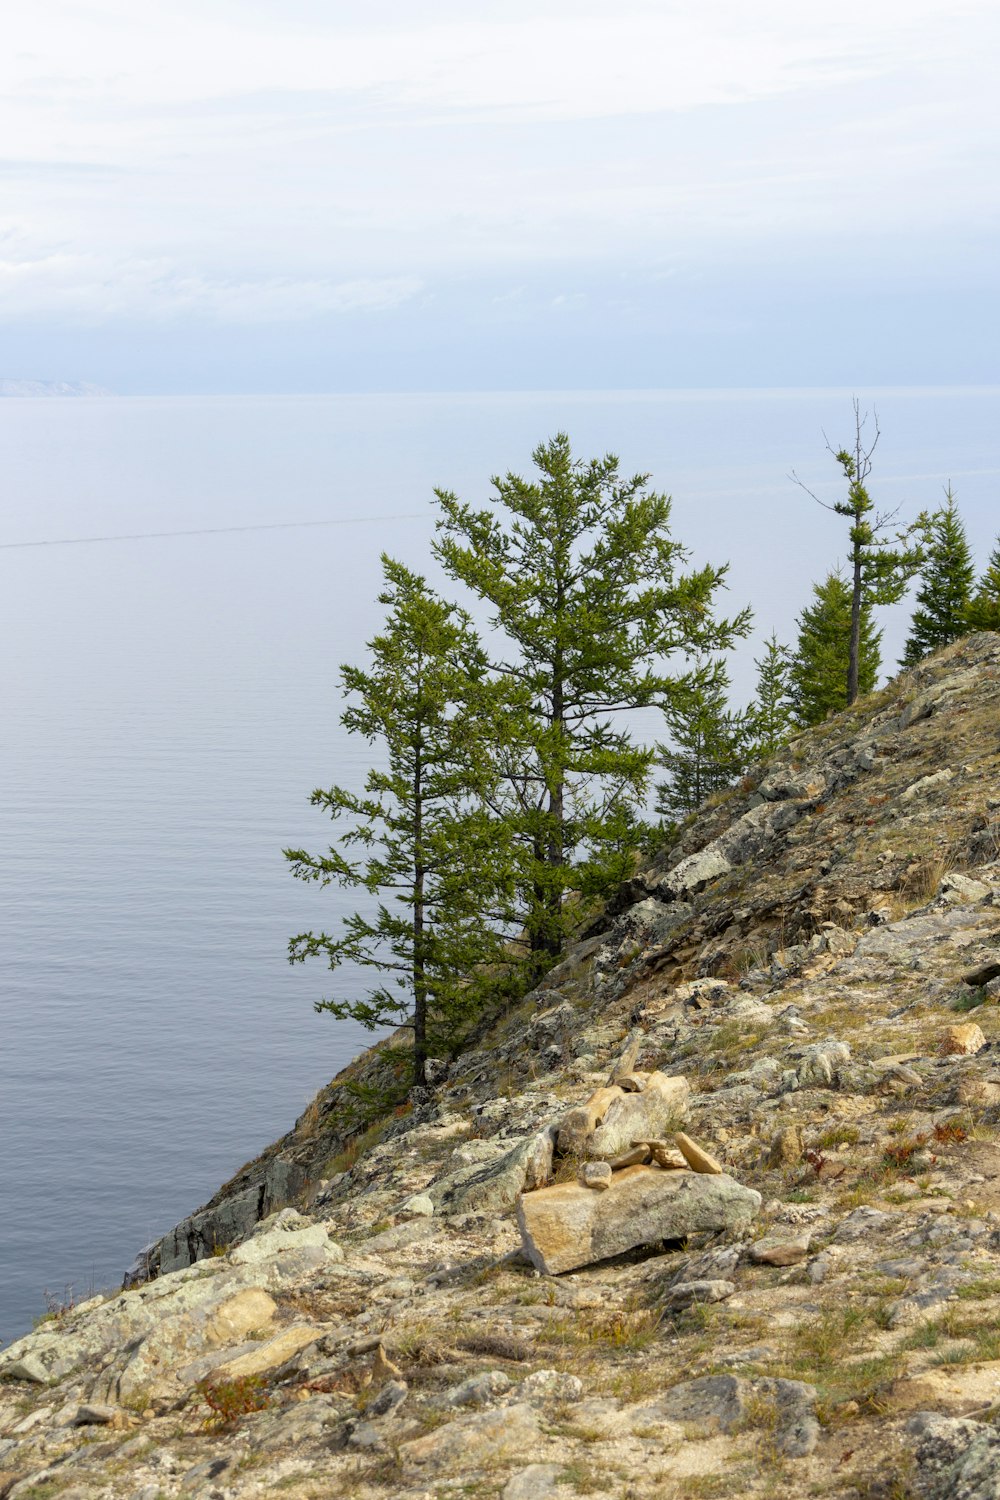 a lone tree on the edge of a cliff overlooking a body of water